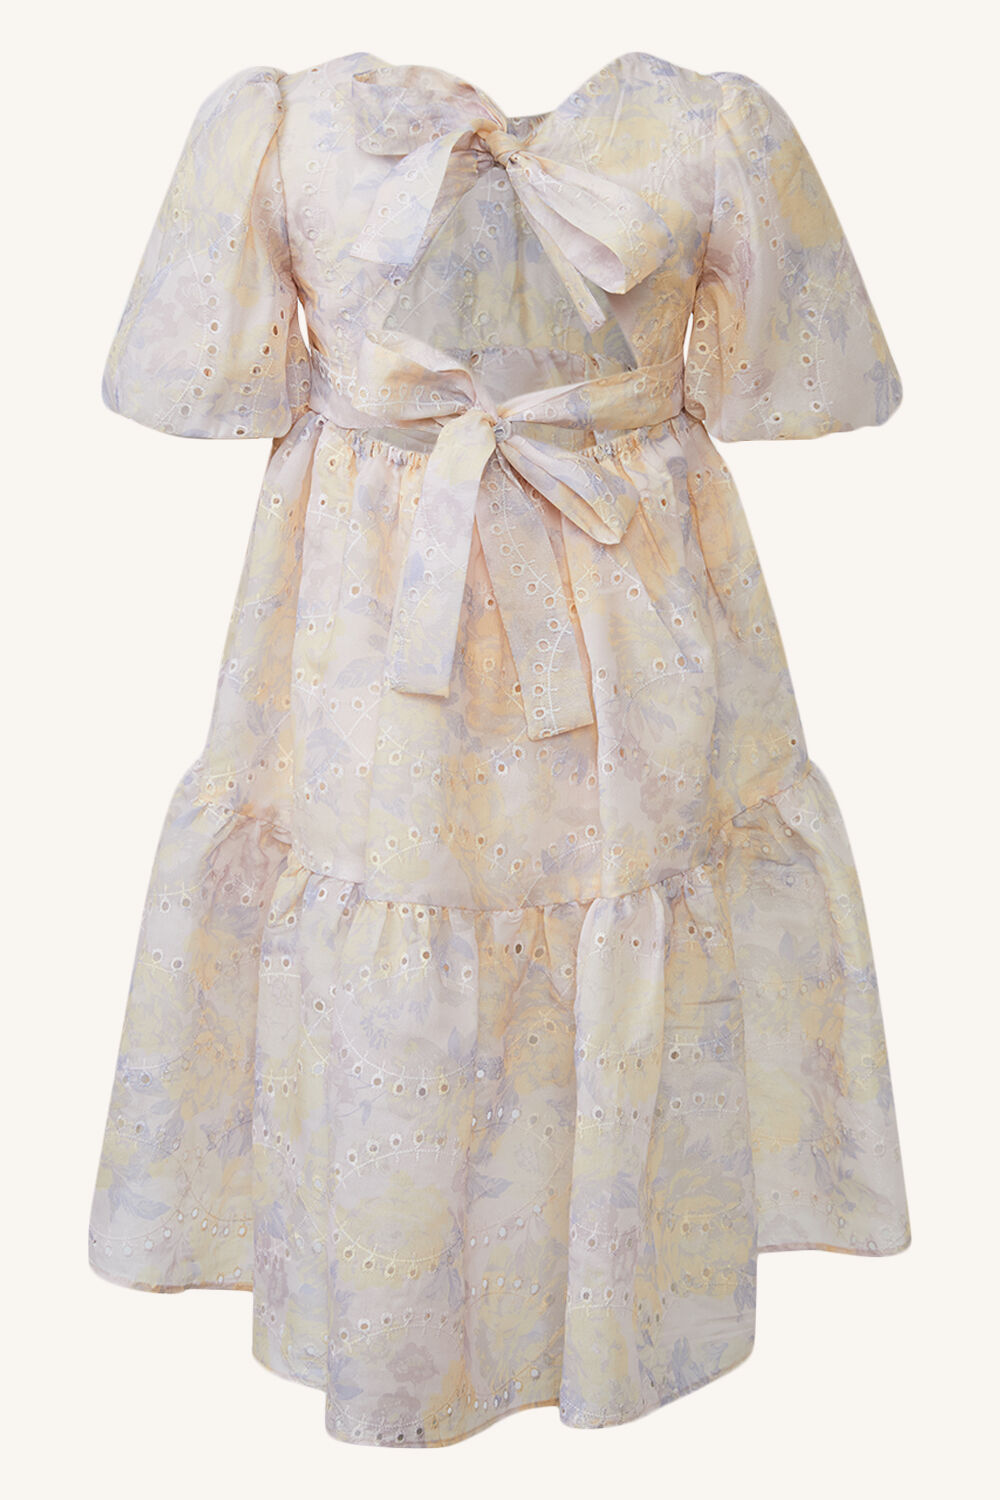 GIRLS SOFT FLORAL TIERED DRESS in colour WHISPER PINK